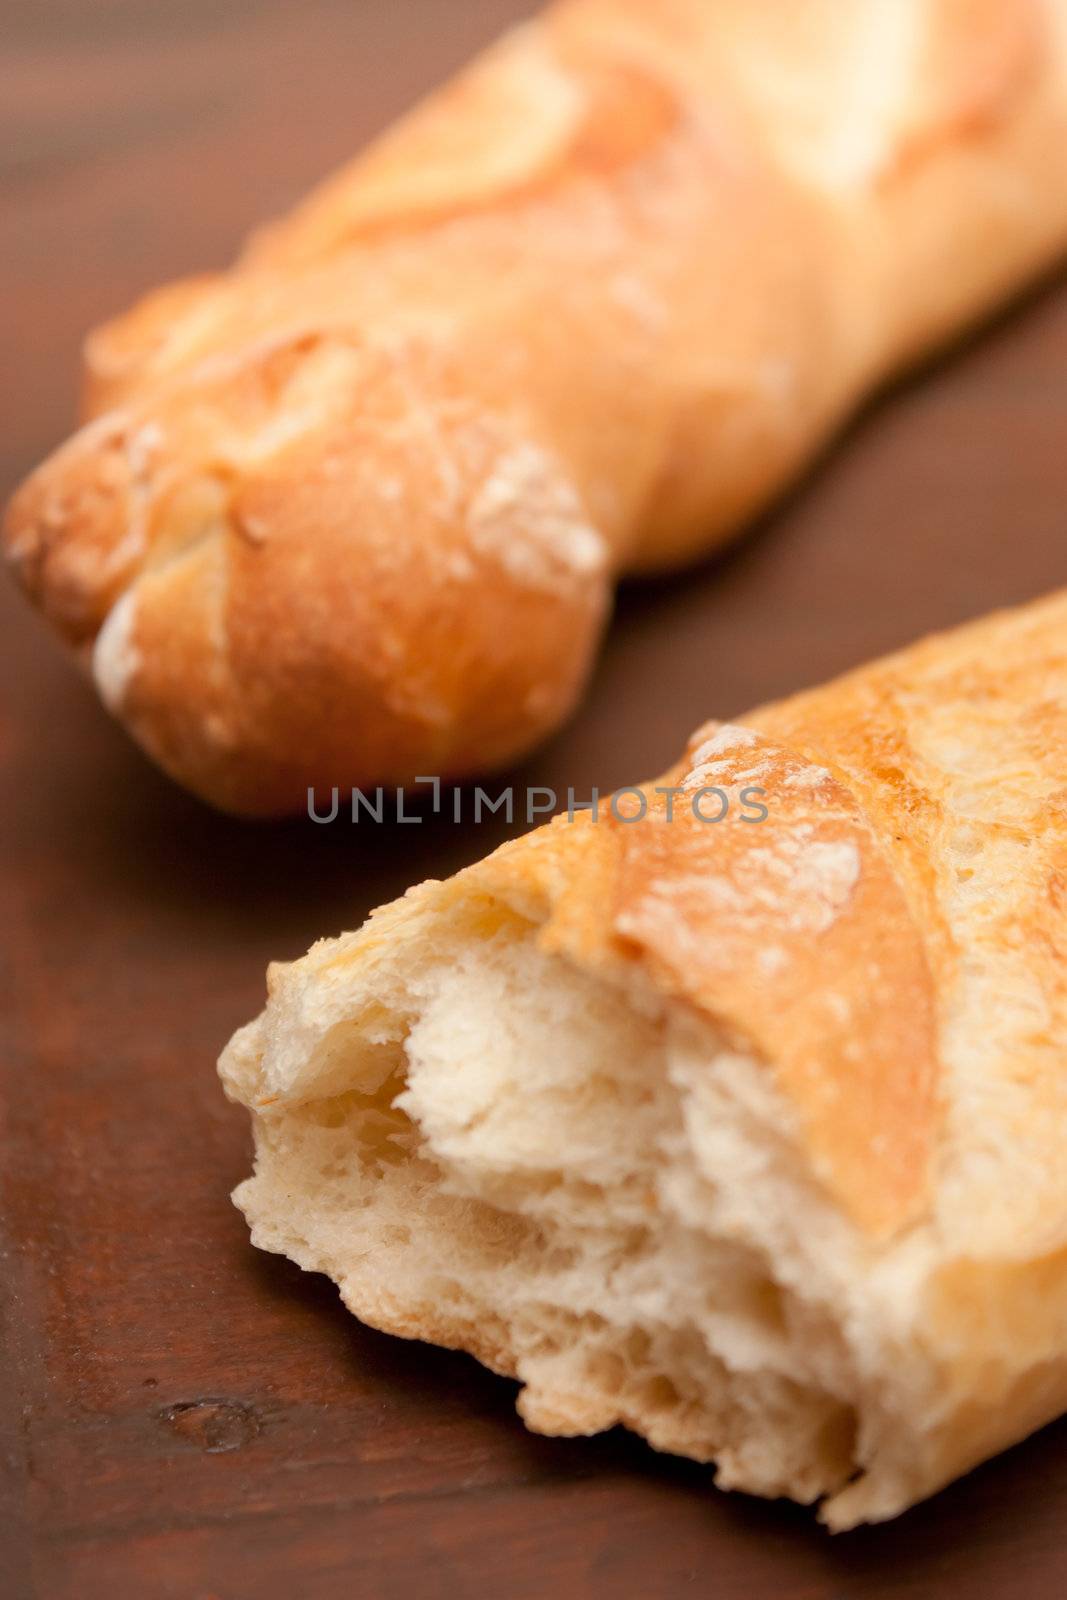 crusty and delicious French baguette made in the traditional way